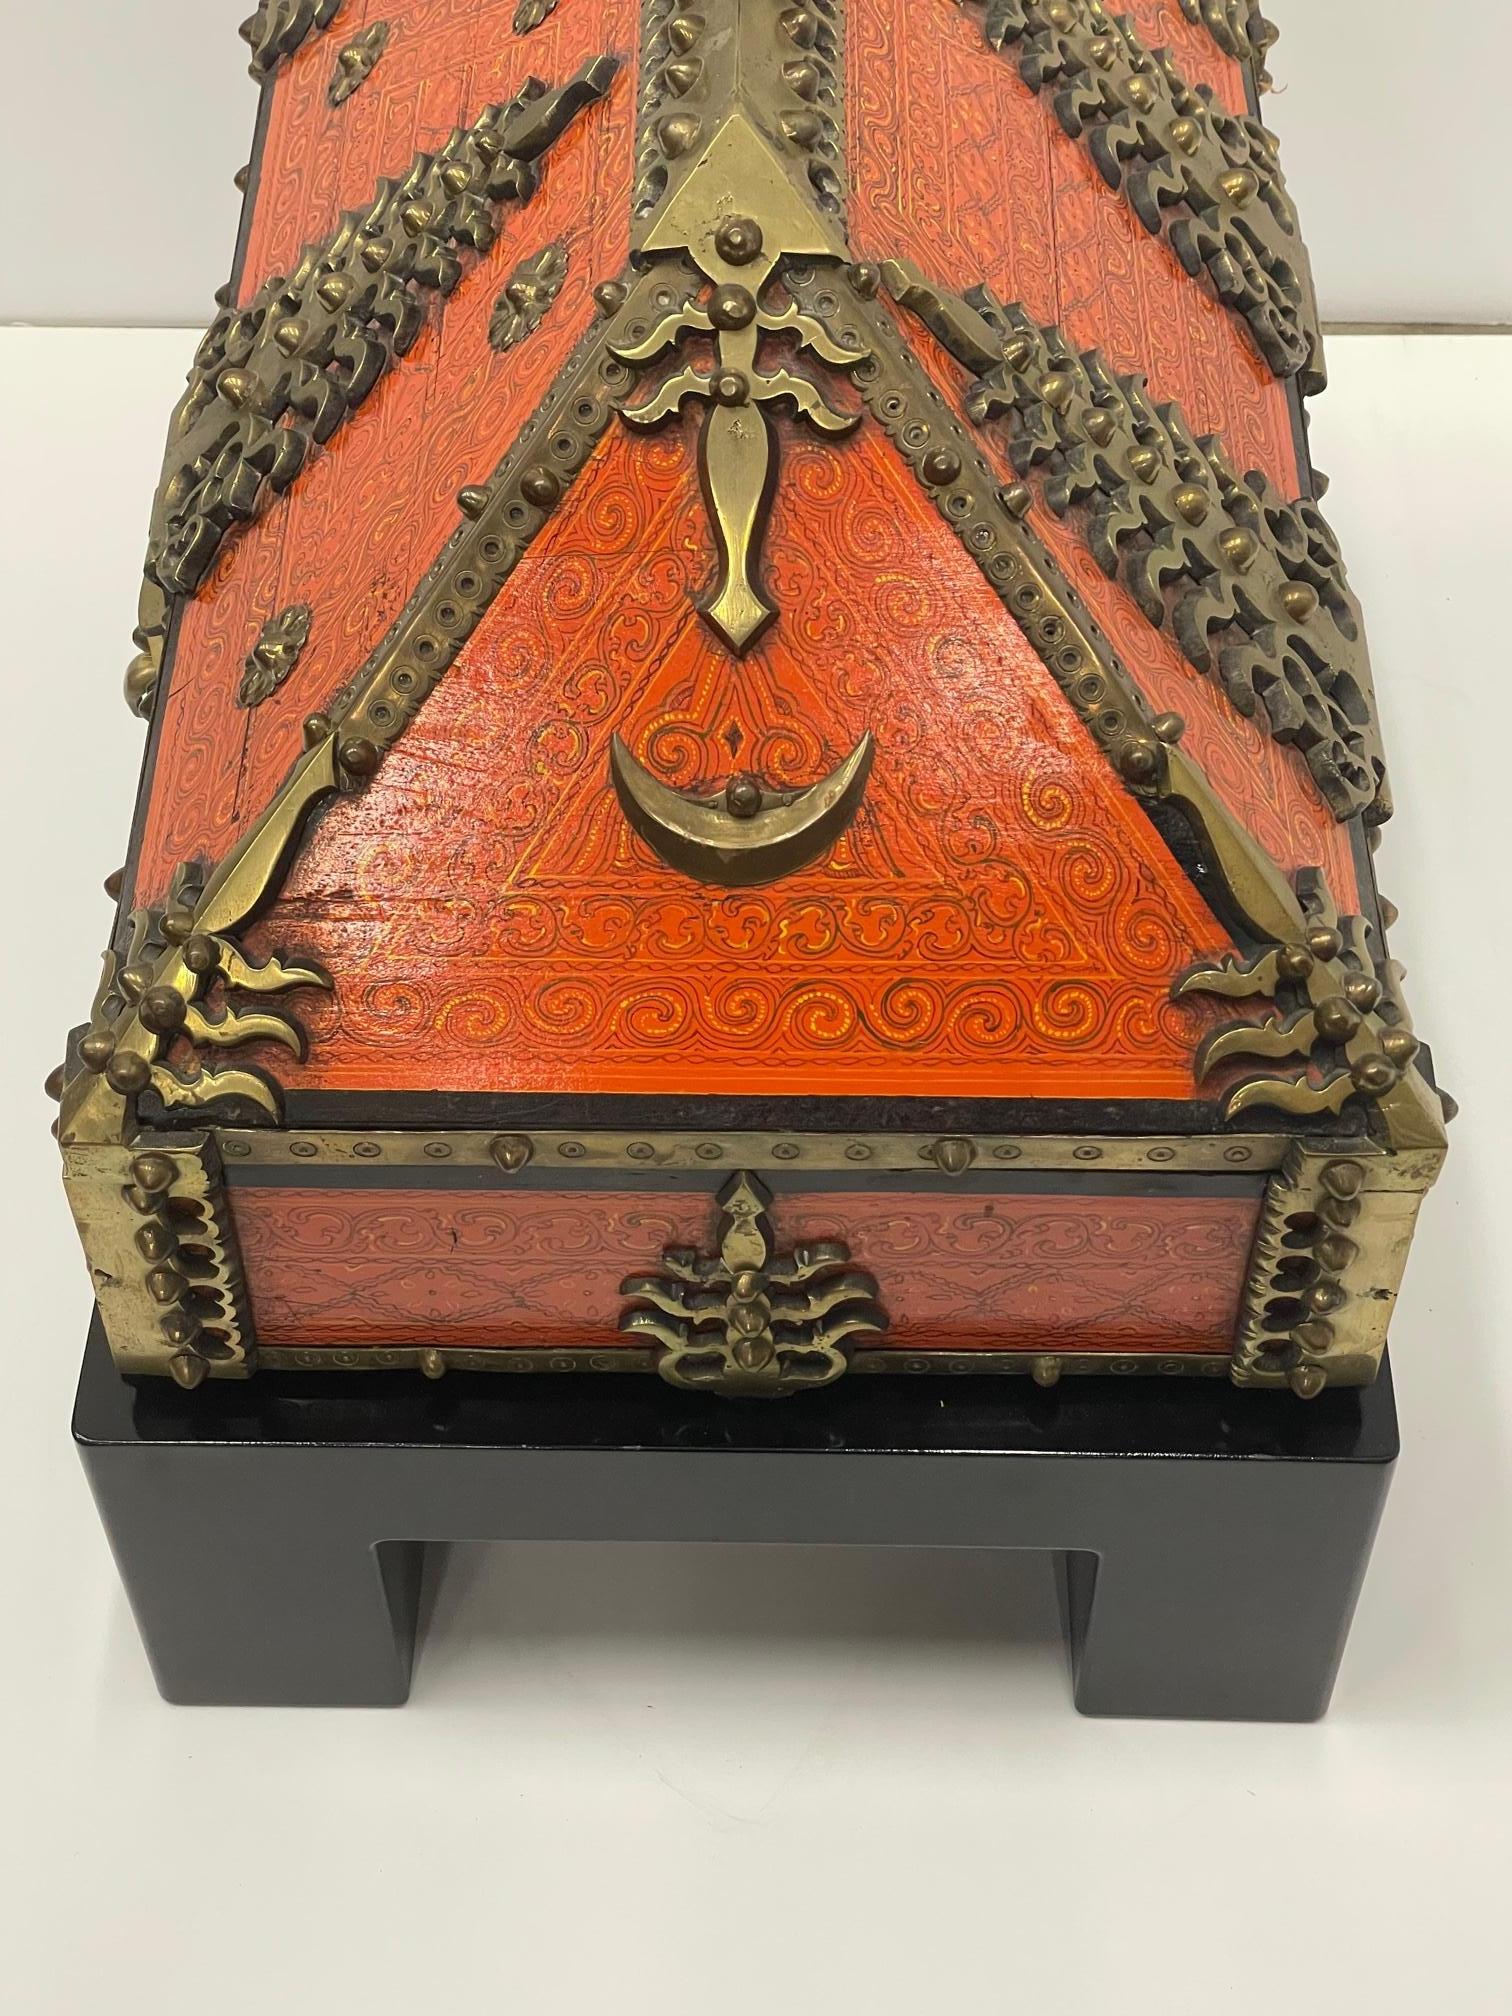 Incredible Monumental 19th Century Ornate Red Lacquer & Brass Dowry Box 3